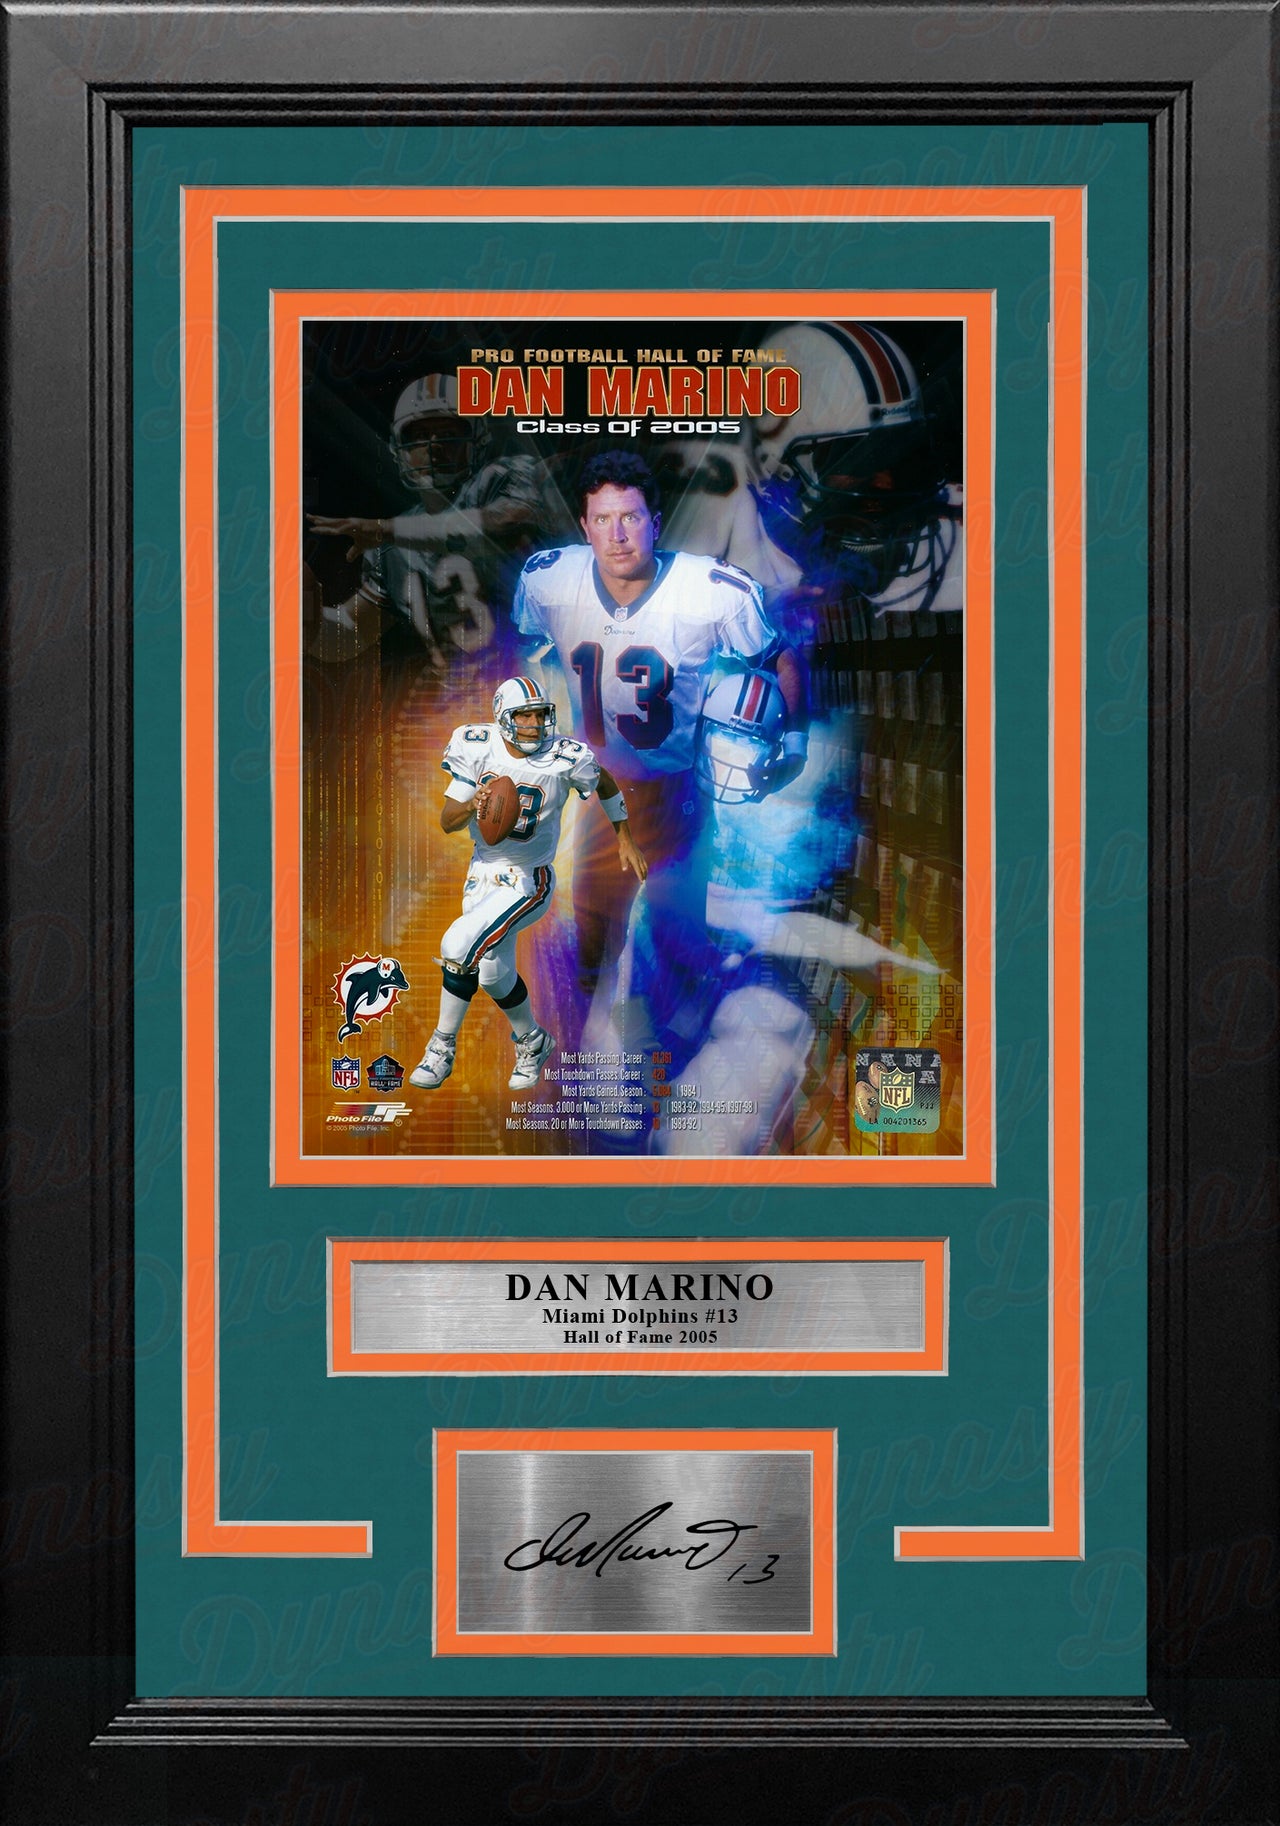 Dan Marino Miami Dolphins 8x10 Framed Hall of Fame Collage Football Photo with Engraved Autograph